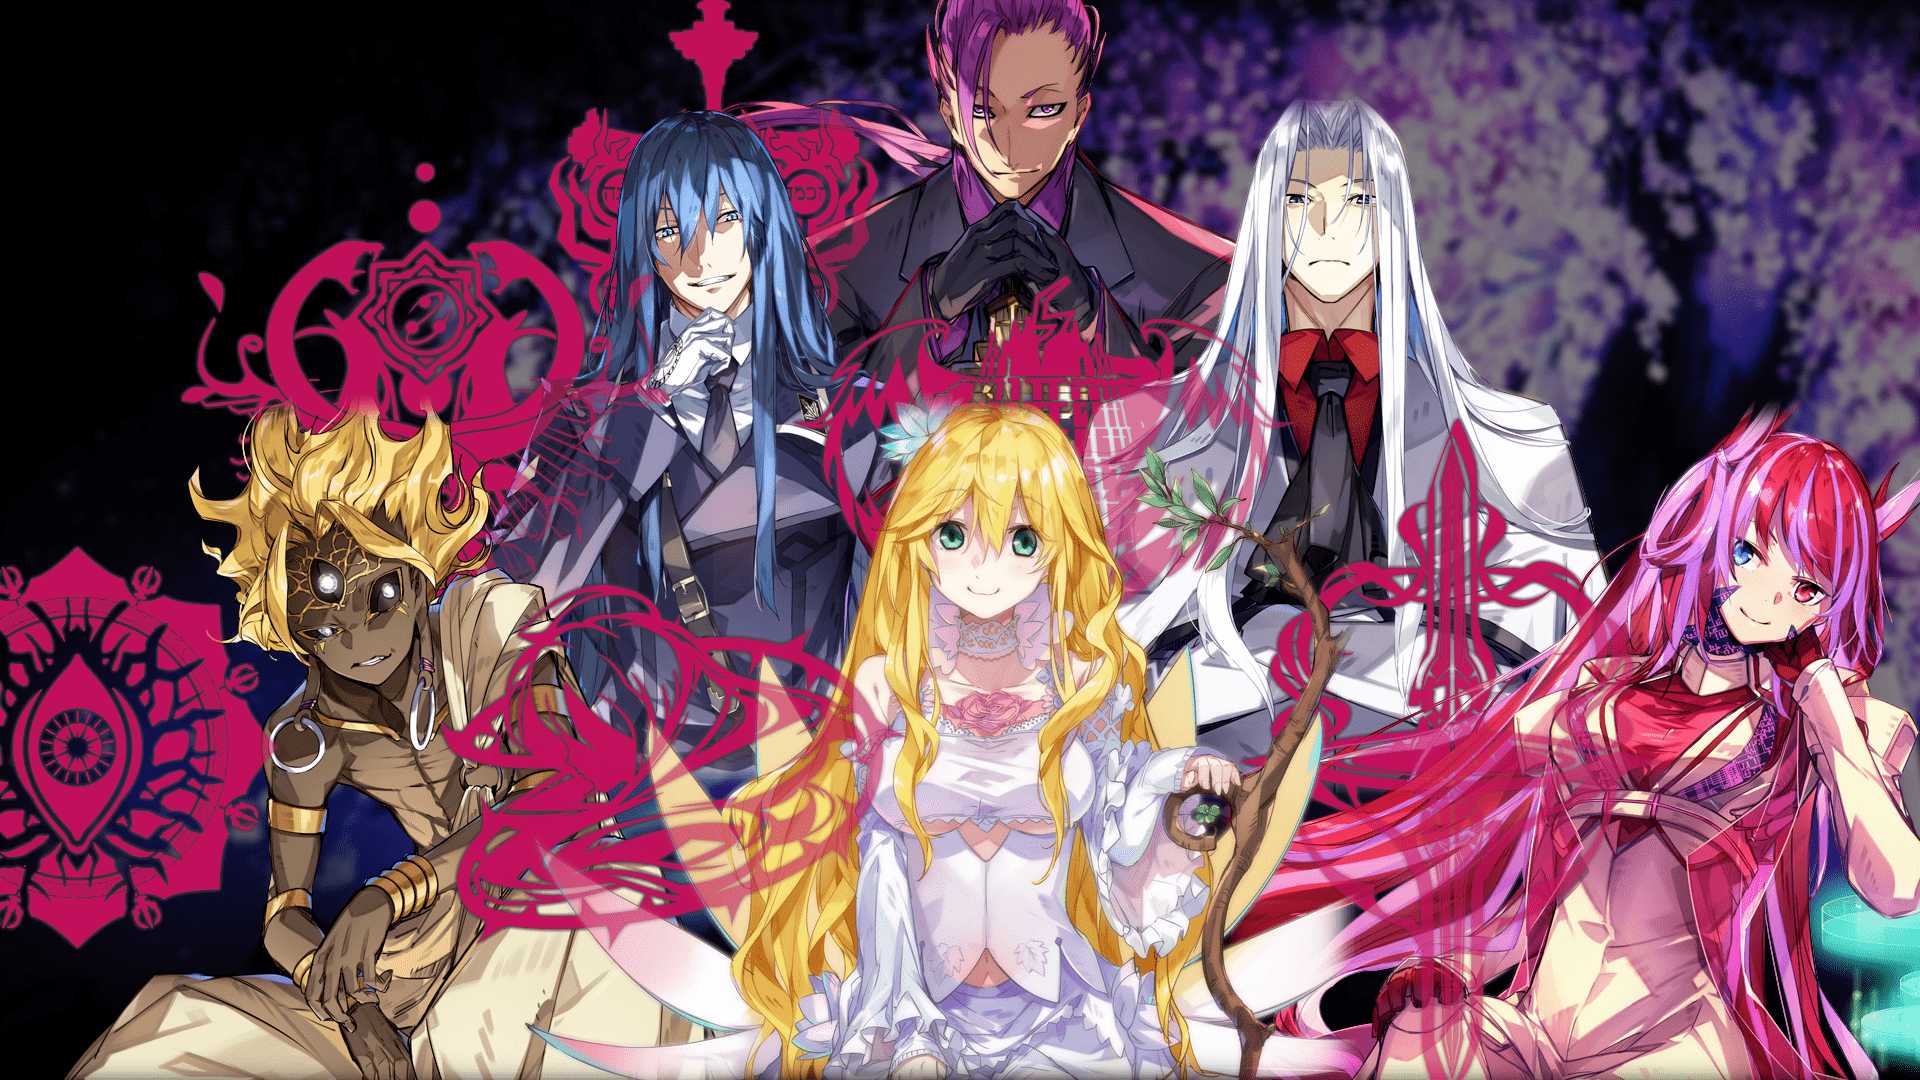 Dies Irae Wallpapers Top Free Dies Irae Backgrounds Wallpaperaccess